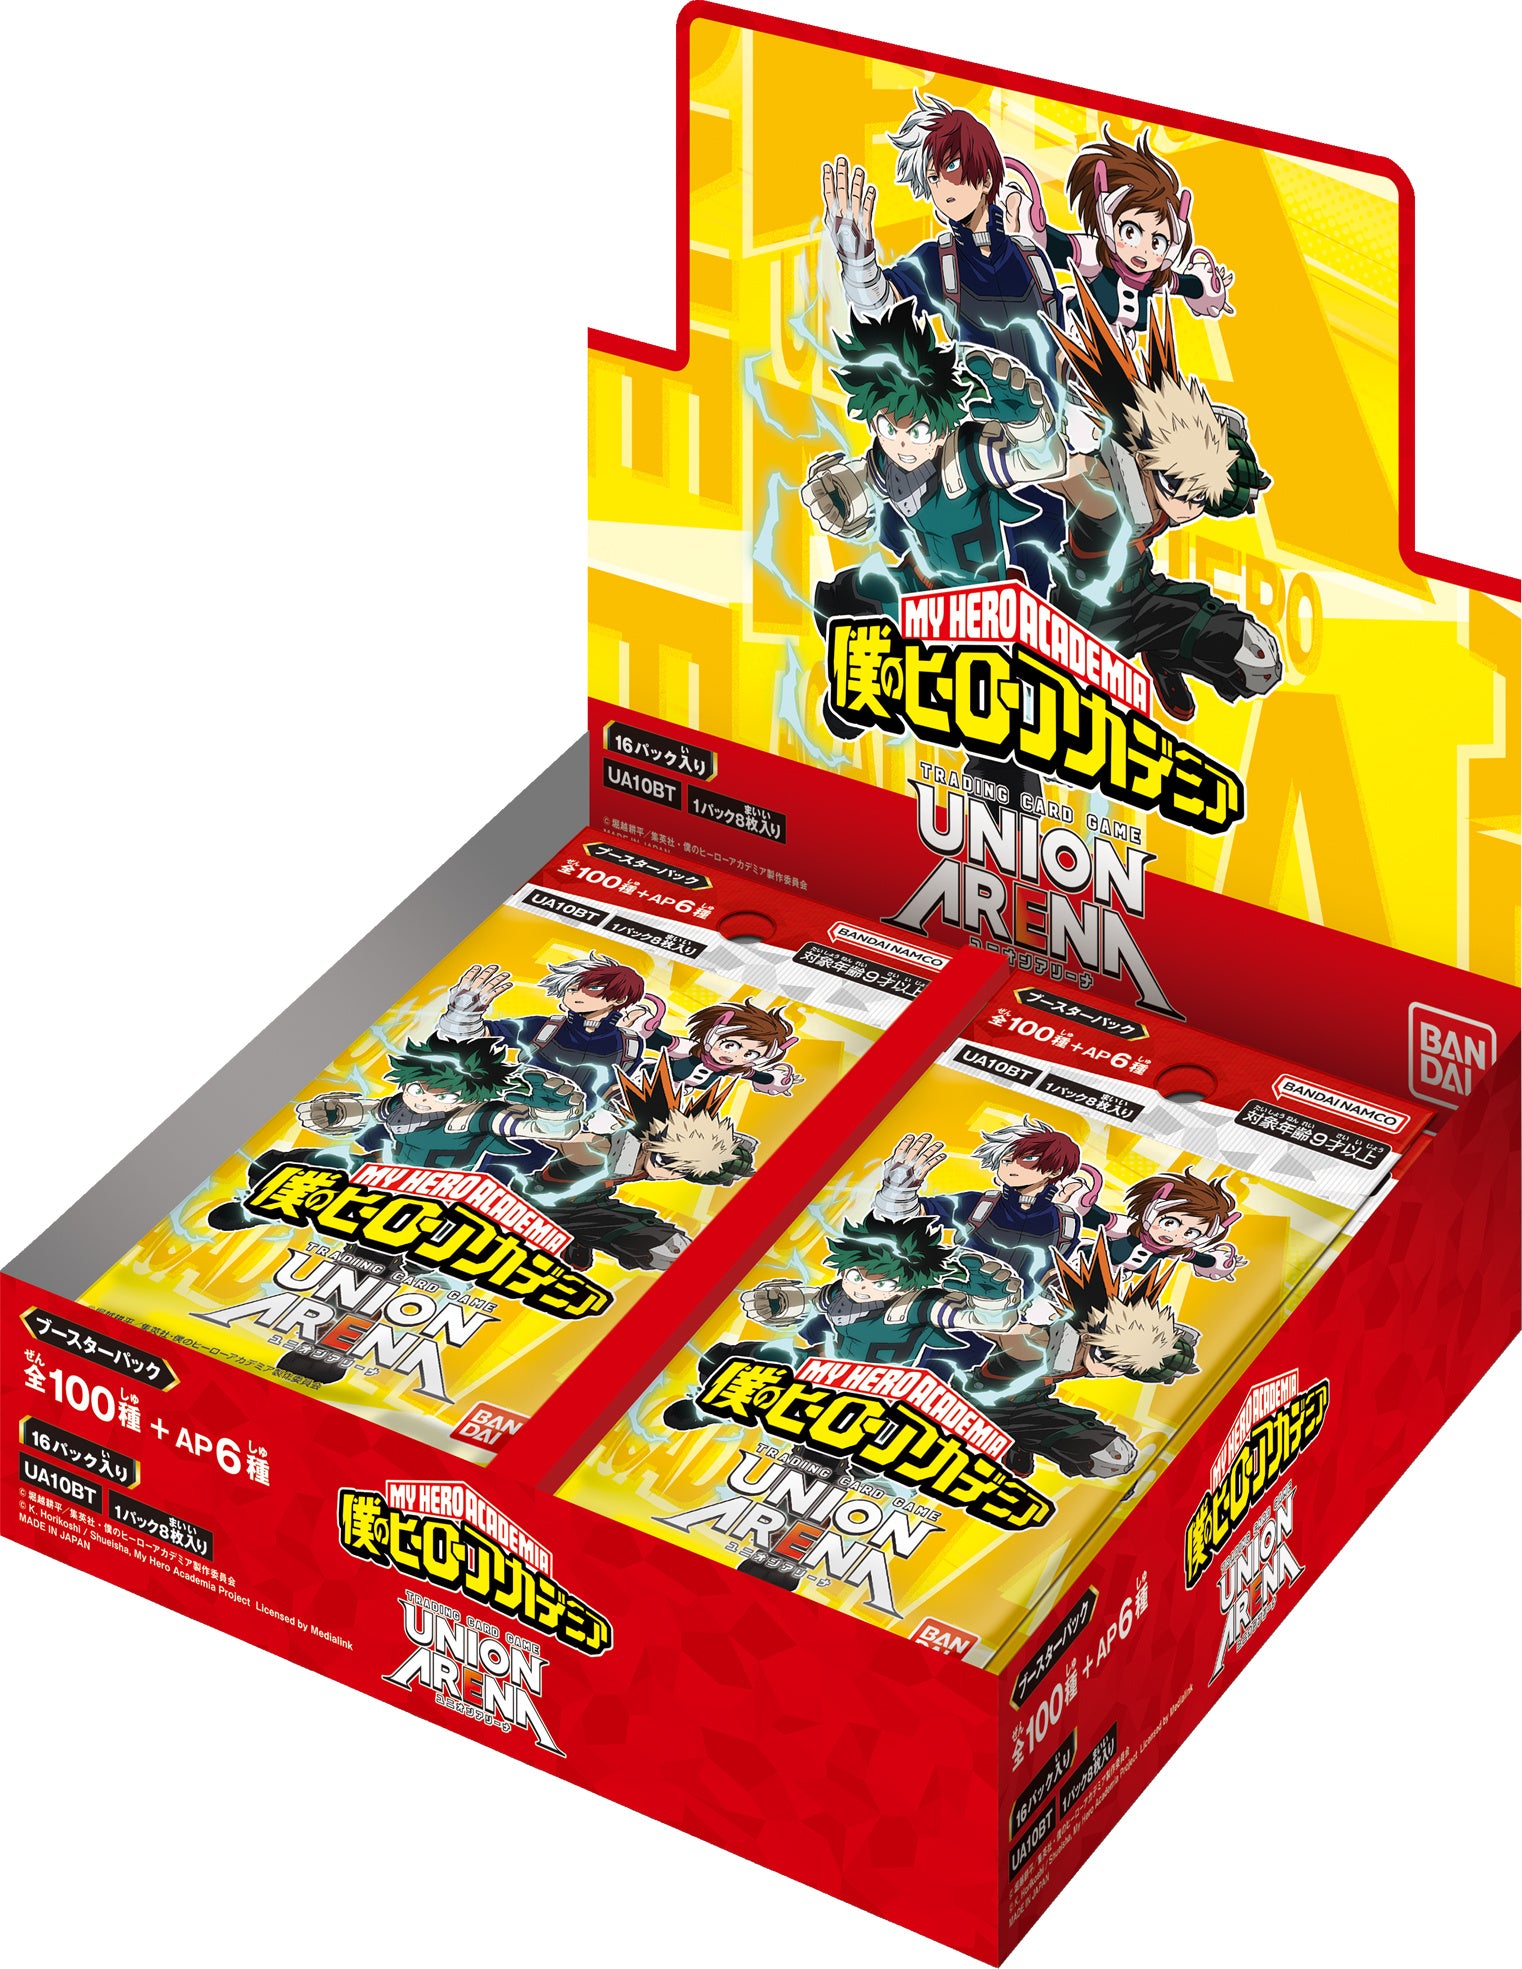 Union Arena My Hero Academia Booster Case (16 Box) [Preorder] - n4ytcg